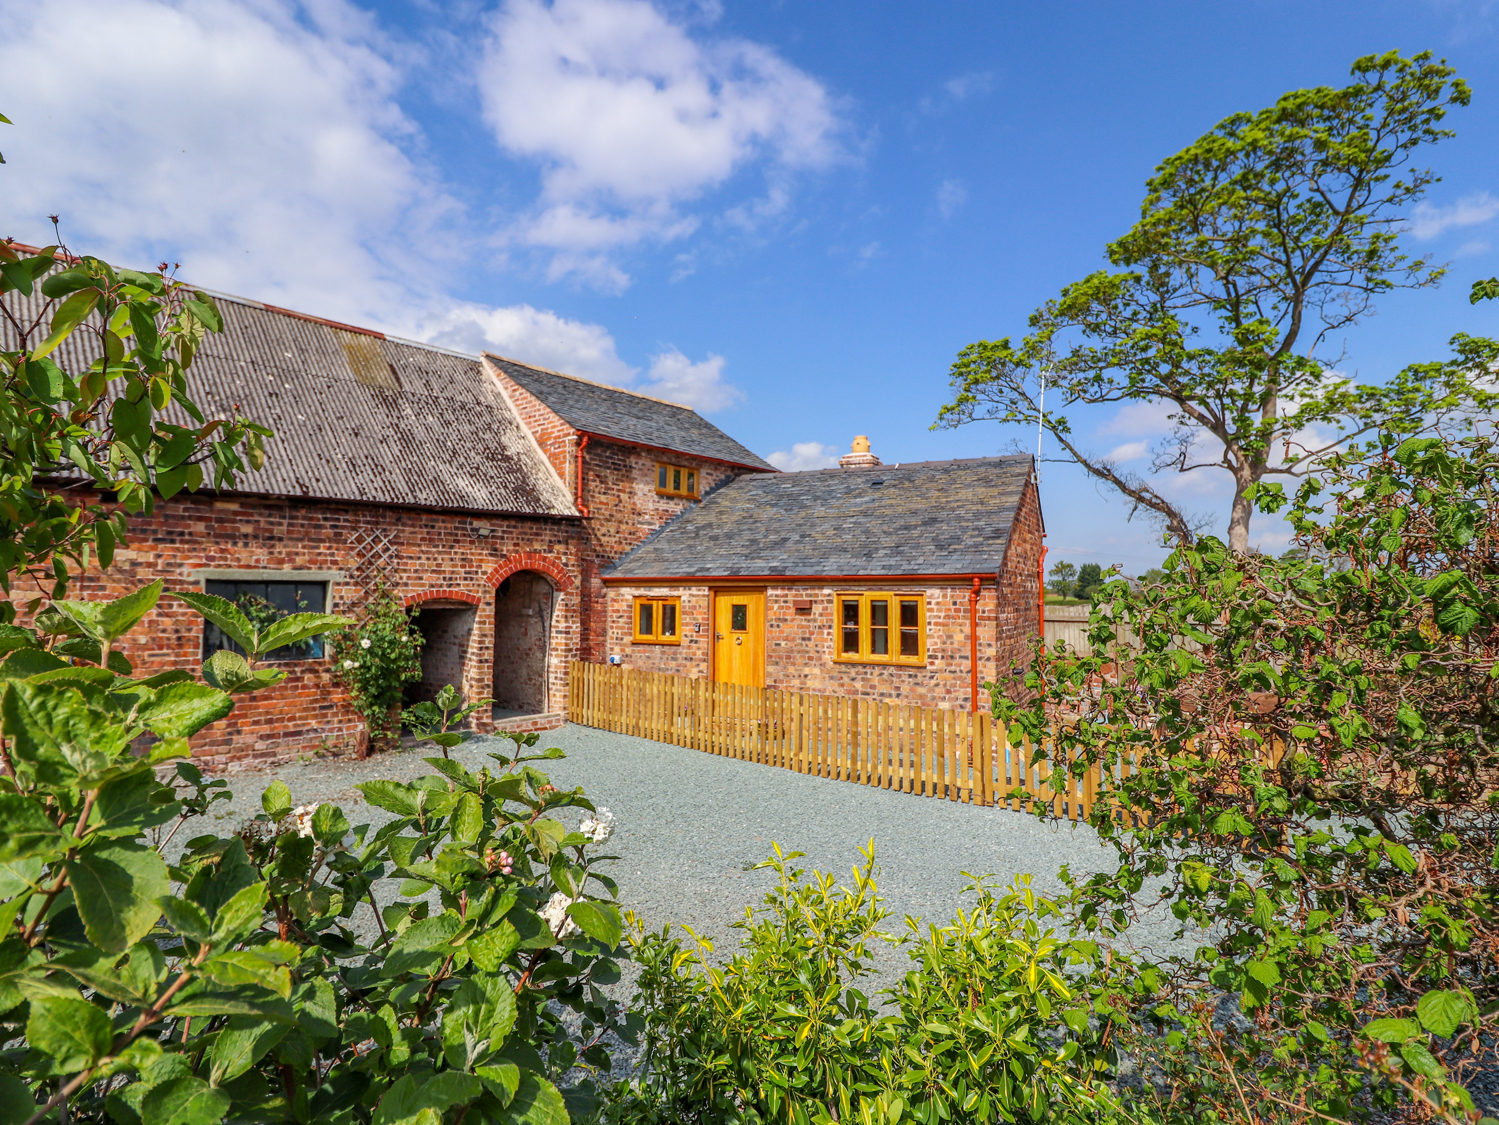 Holiday cottages in Shropshire: The Tractor Shed, Kinnerley near Oswestry | sykescottages.co.uk 